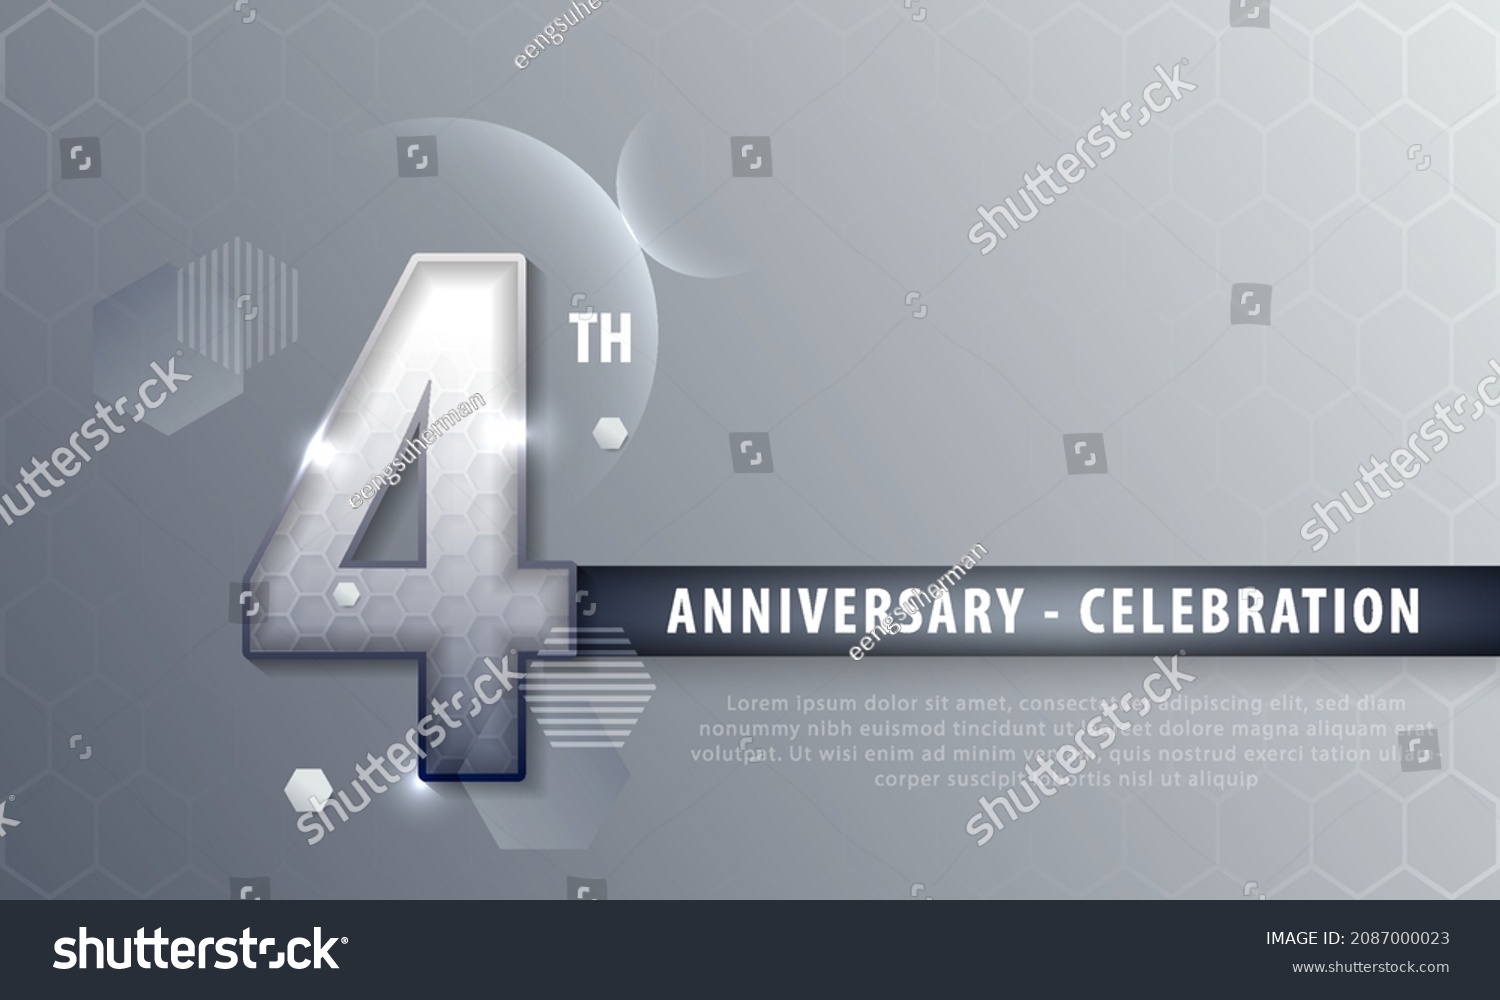 SVG of 4 years anniversary luxury logo template hexagonal shape. Poster template for Celebrating 4th event. Design for banner, magazine, brochure, web, invitation or greeting card. Vector illustration svg